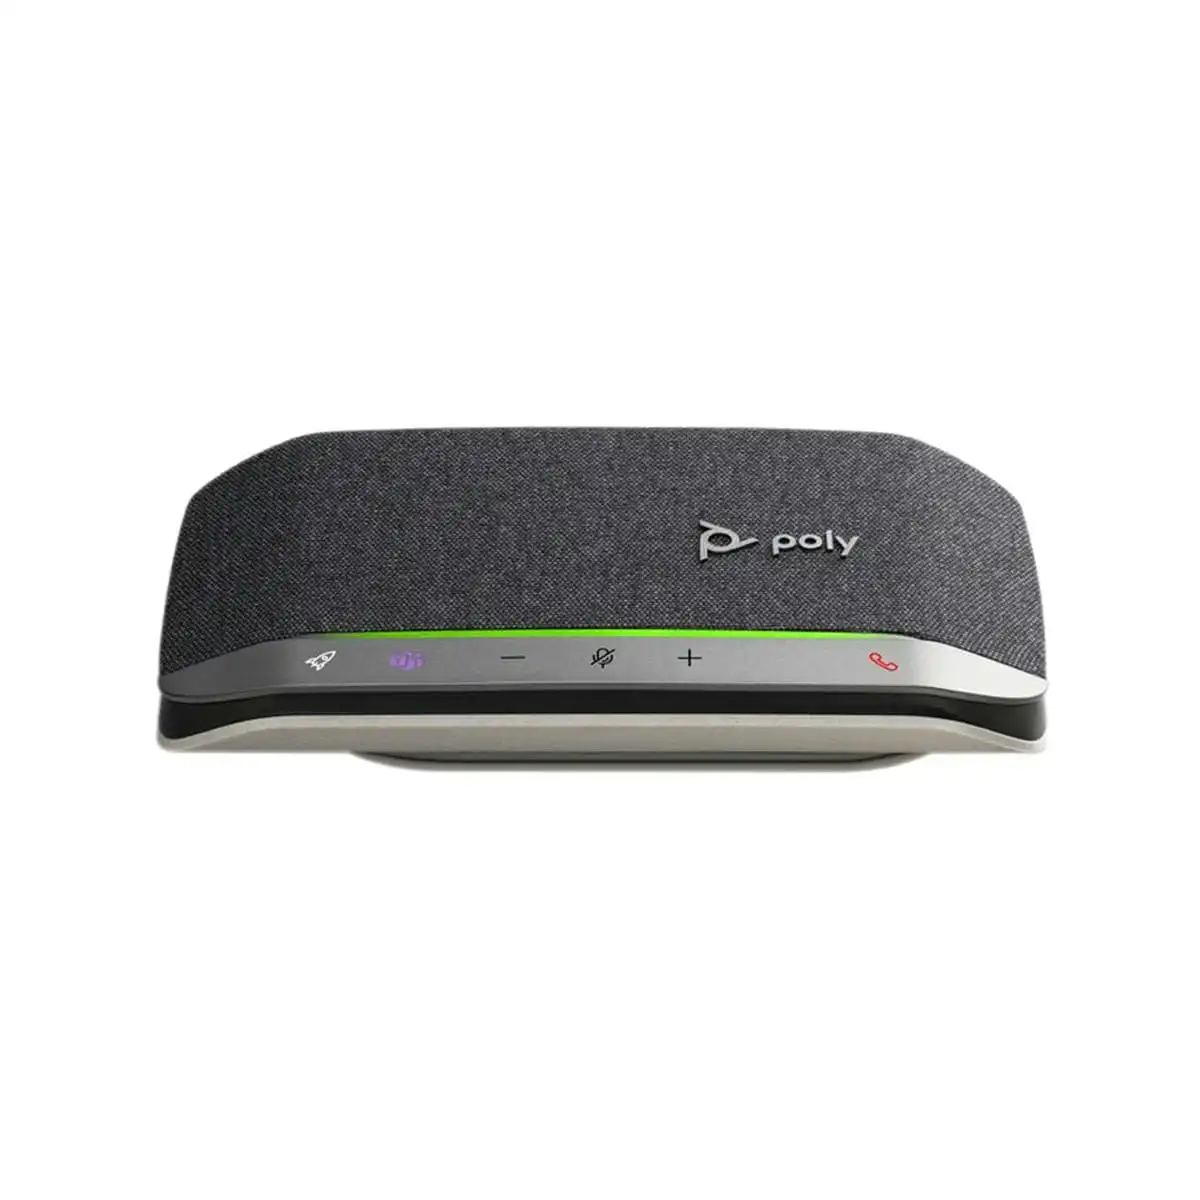 Poly Sync 20+ USB Smart Speakerphone for Home/Office